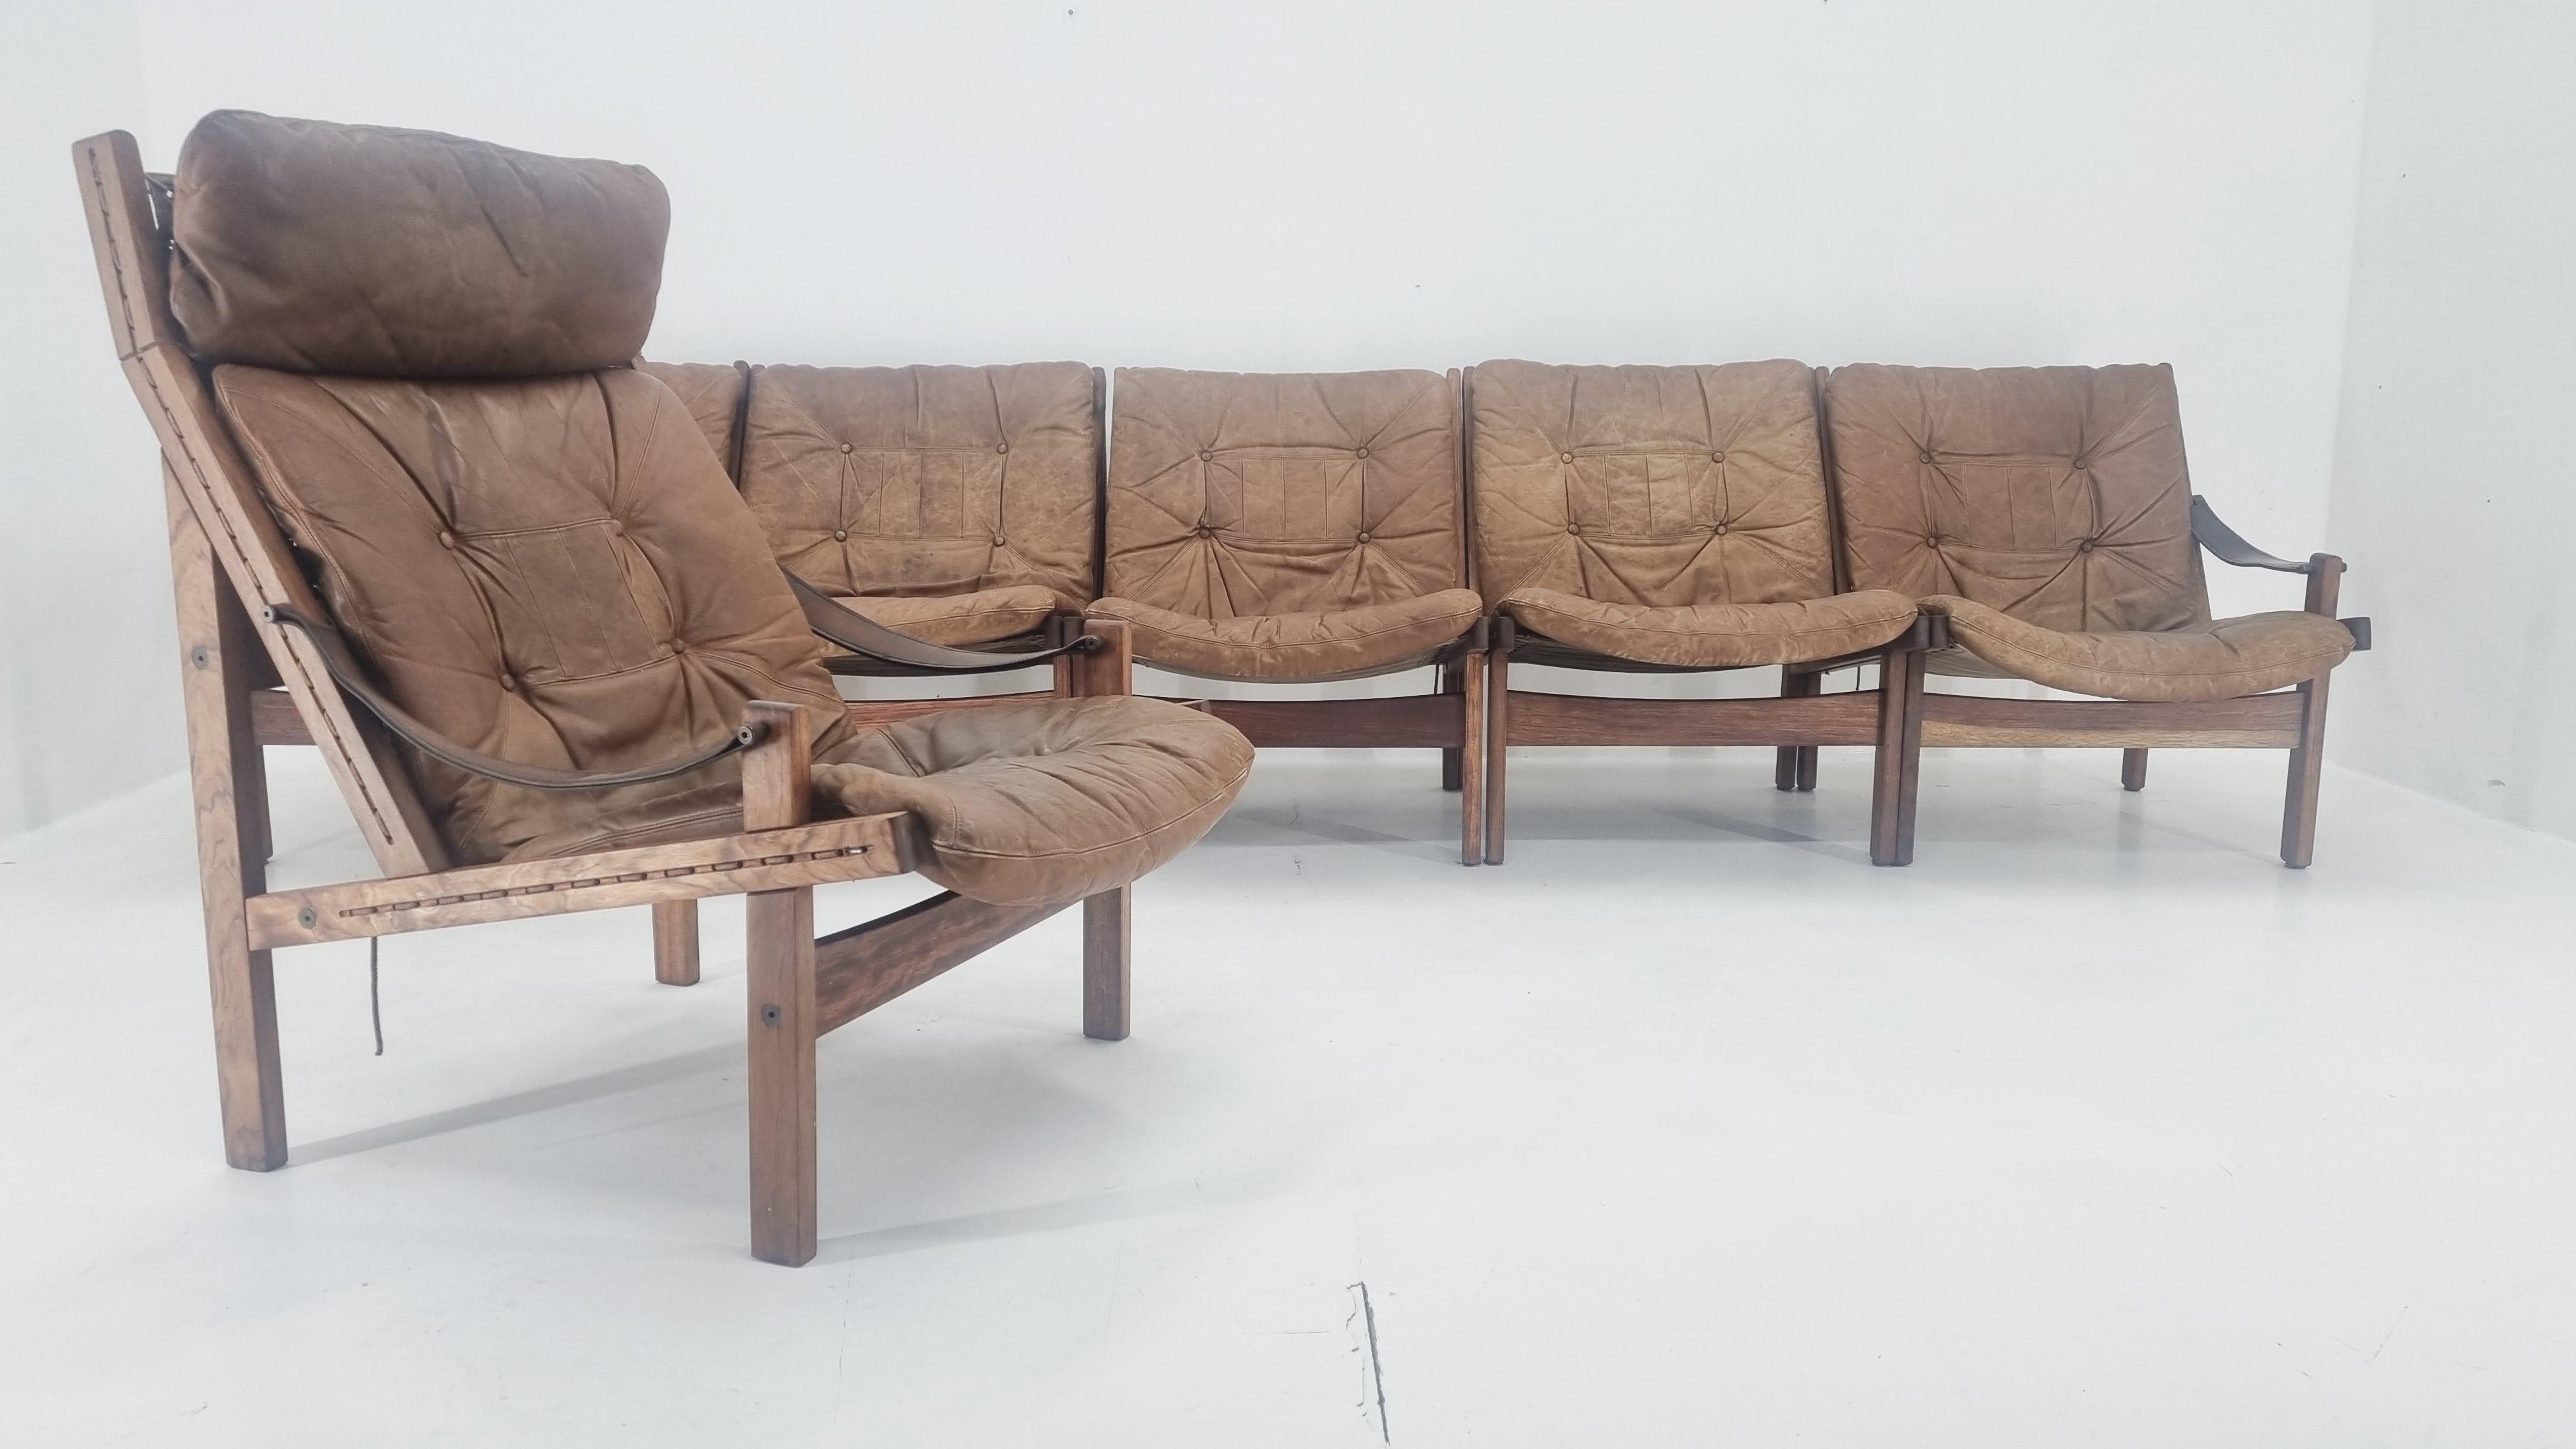 Mid-20th Century Set of Five Midcentury Chairs Hunter by Torbjørn Afdal for Bruksbo Norway, 1960s For Sale